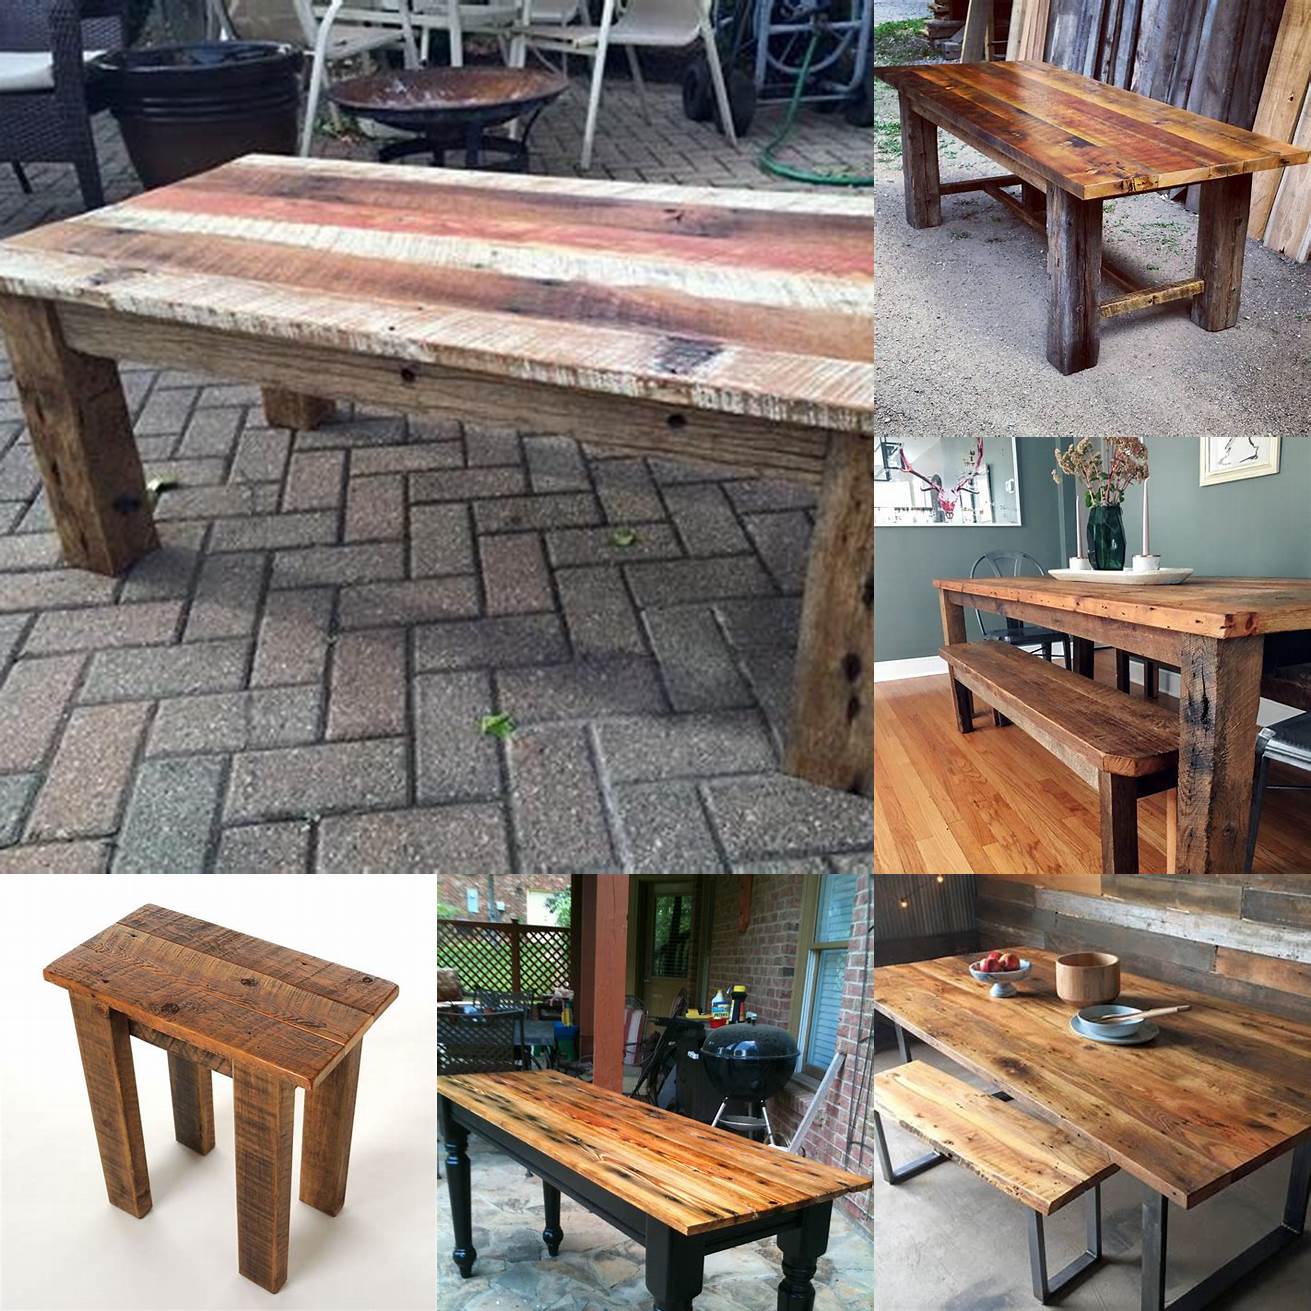 Upcycled table made from reclaimed wood